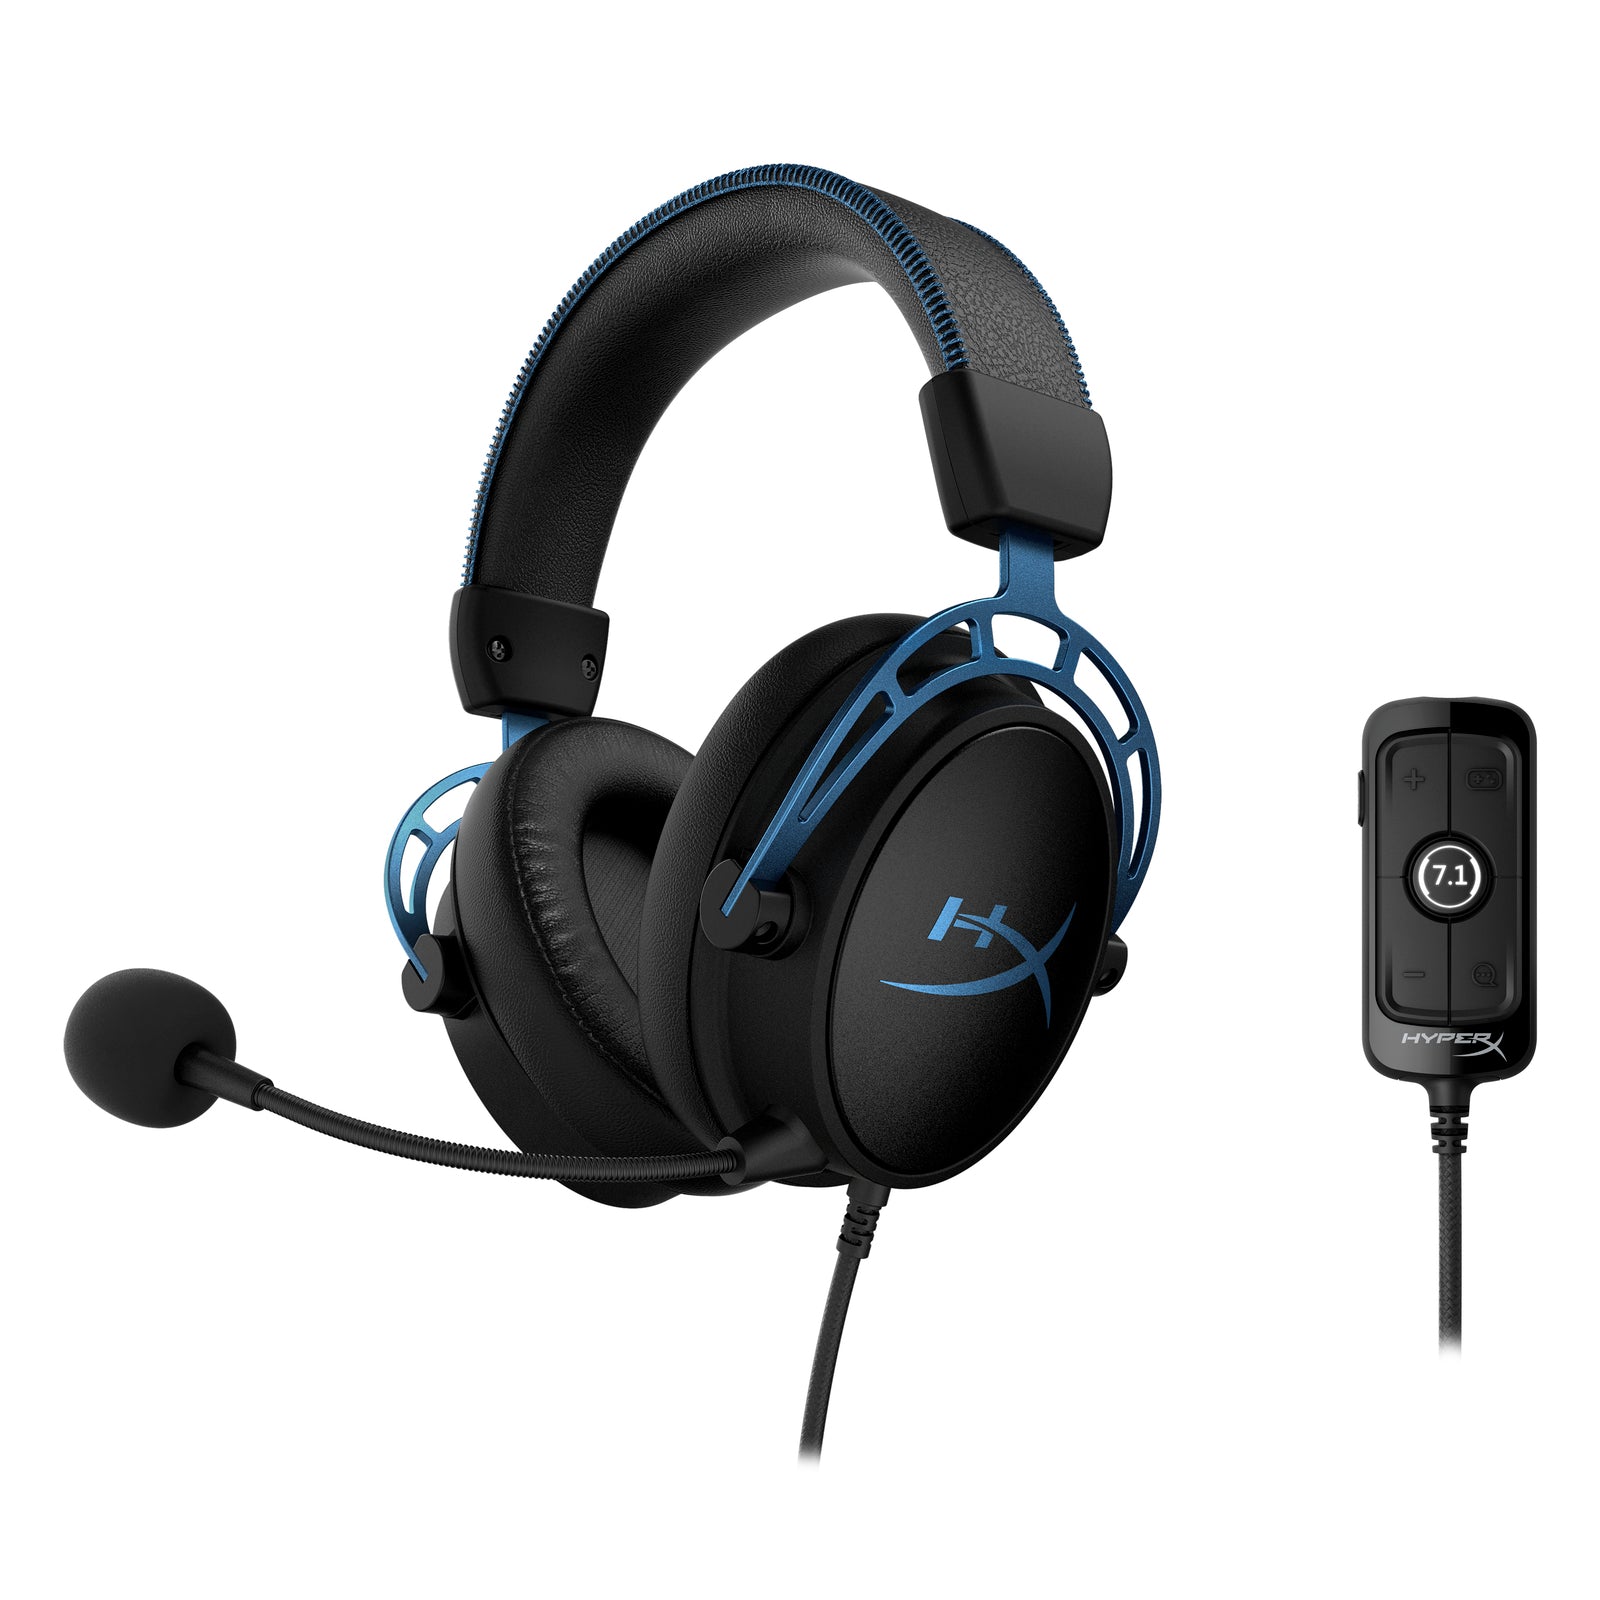 Cloud Alpha S – USB Gaming Headset with 7.1 Surround Sound